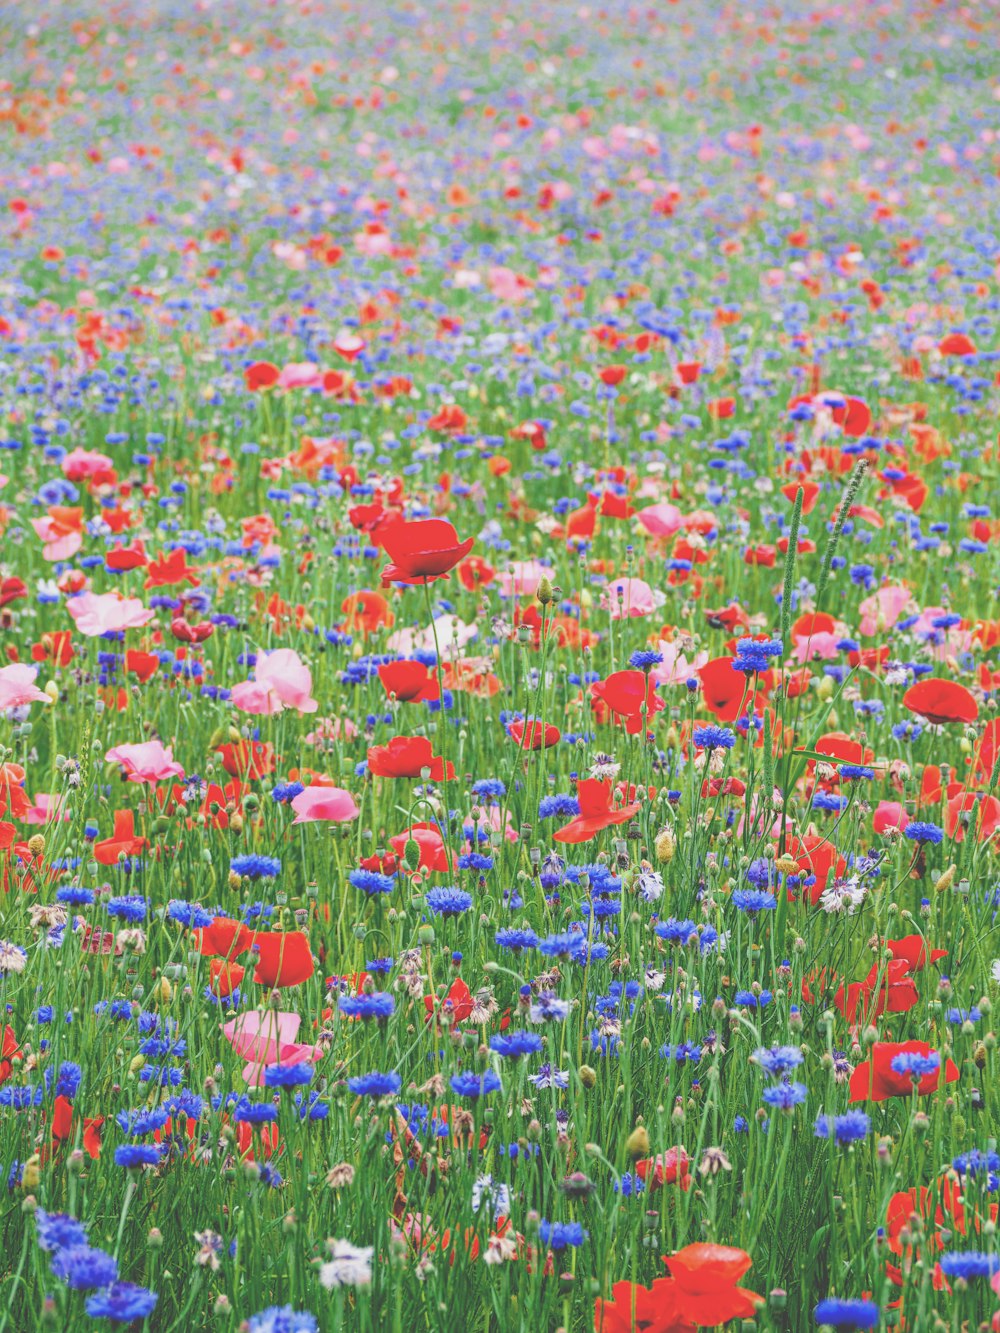 500+ Flower Field Pictures [HD]  Download Free Images on Unsplash